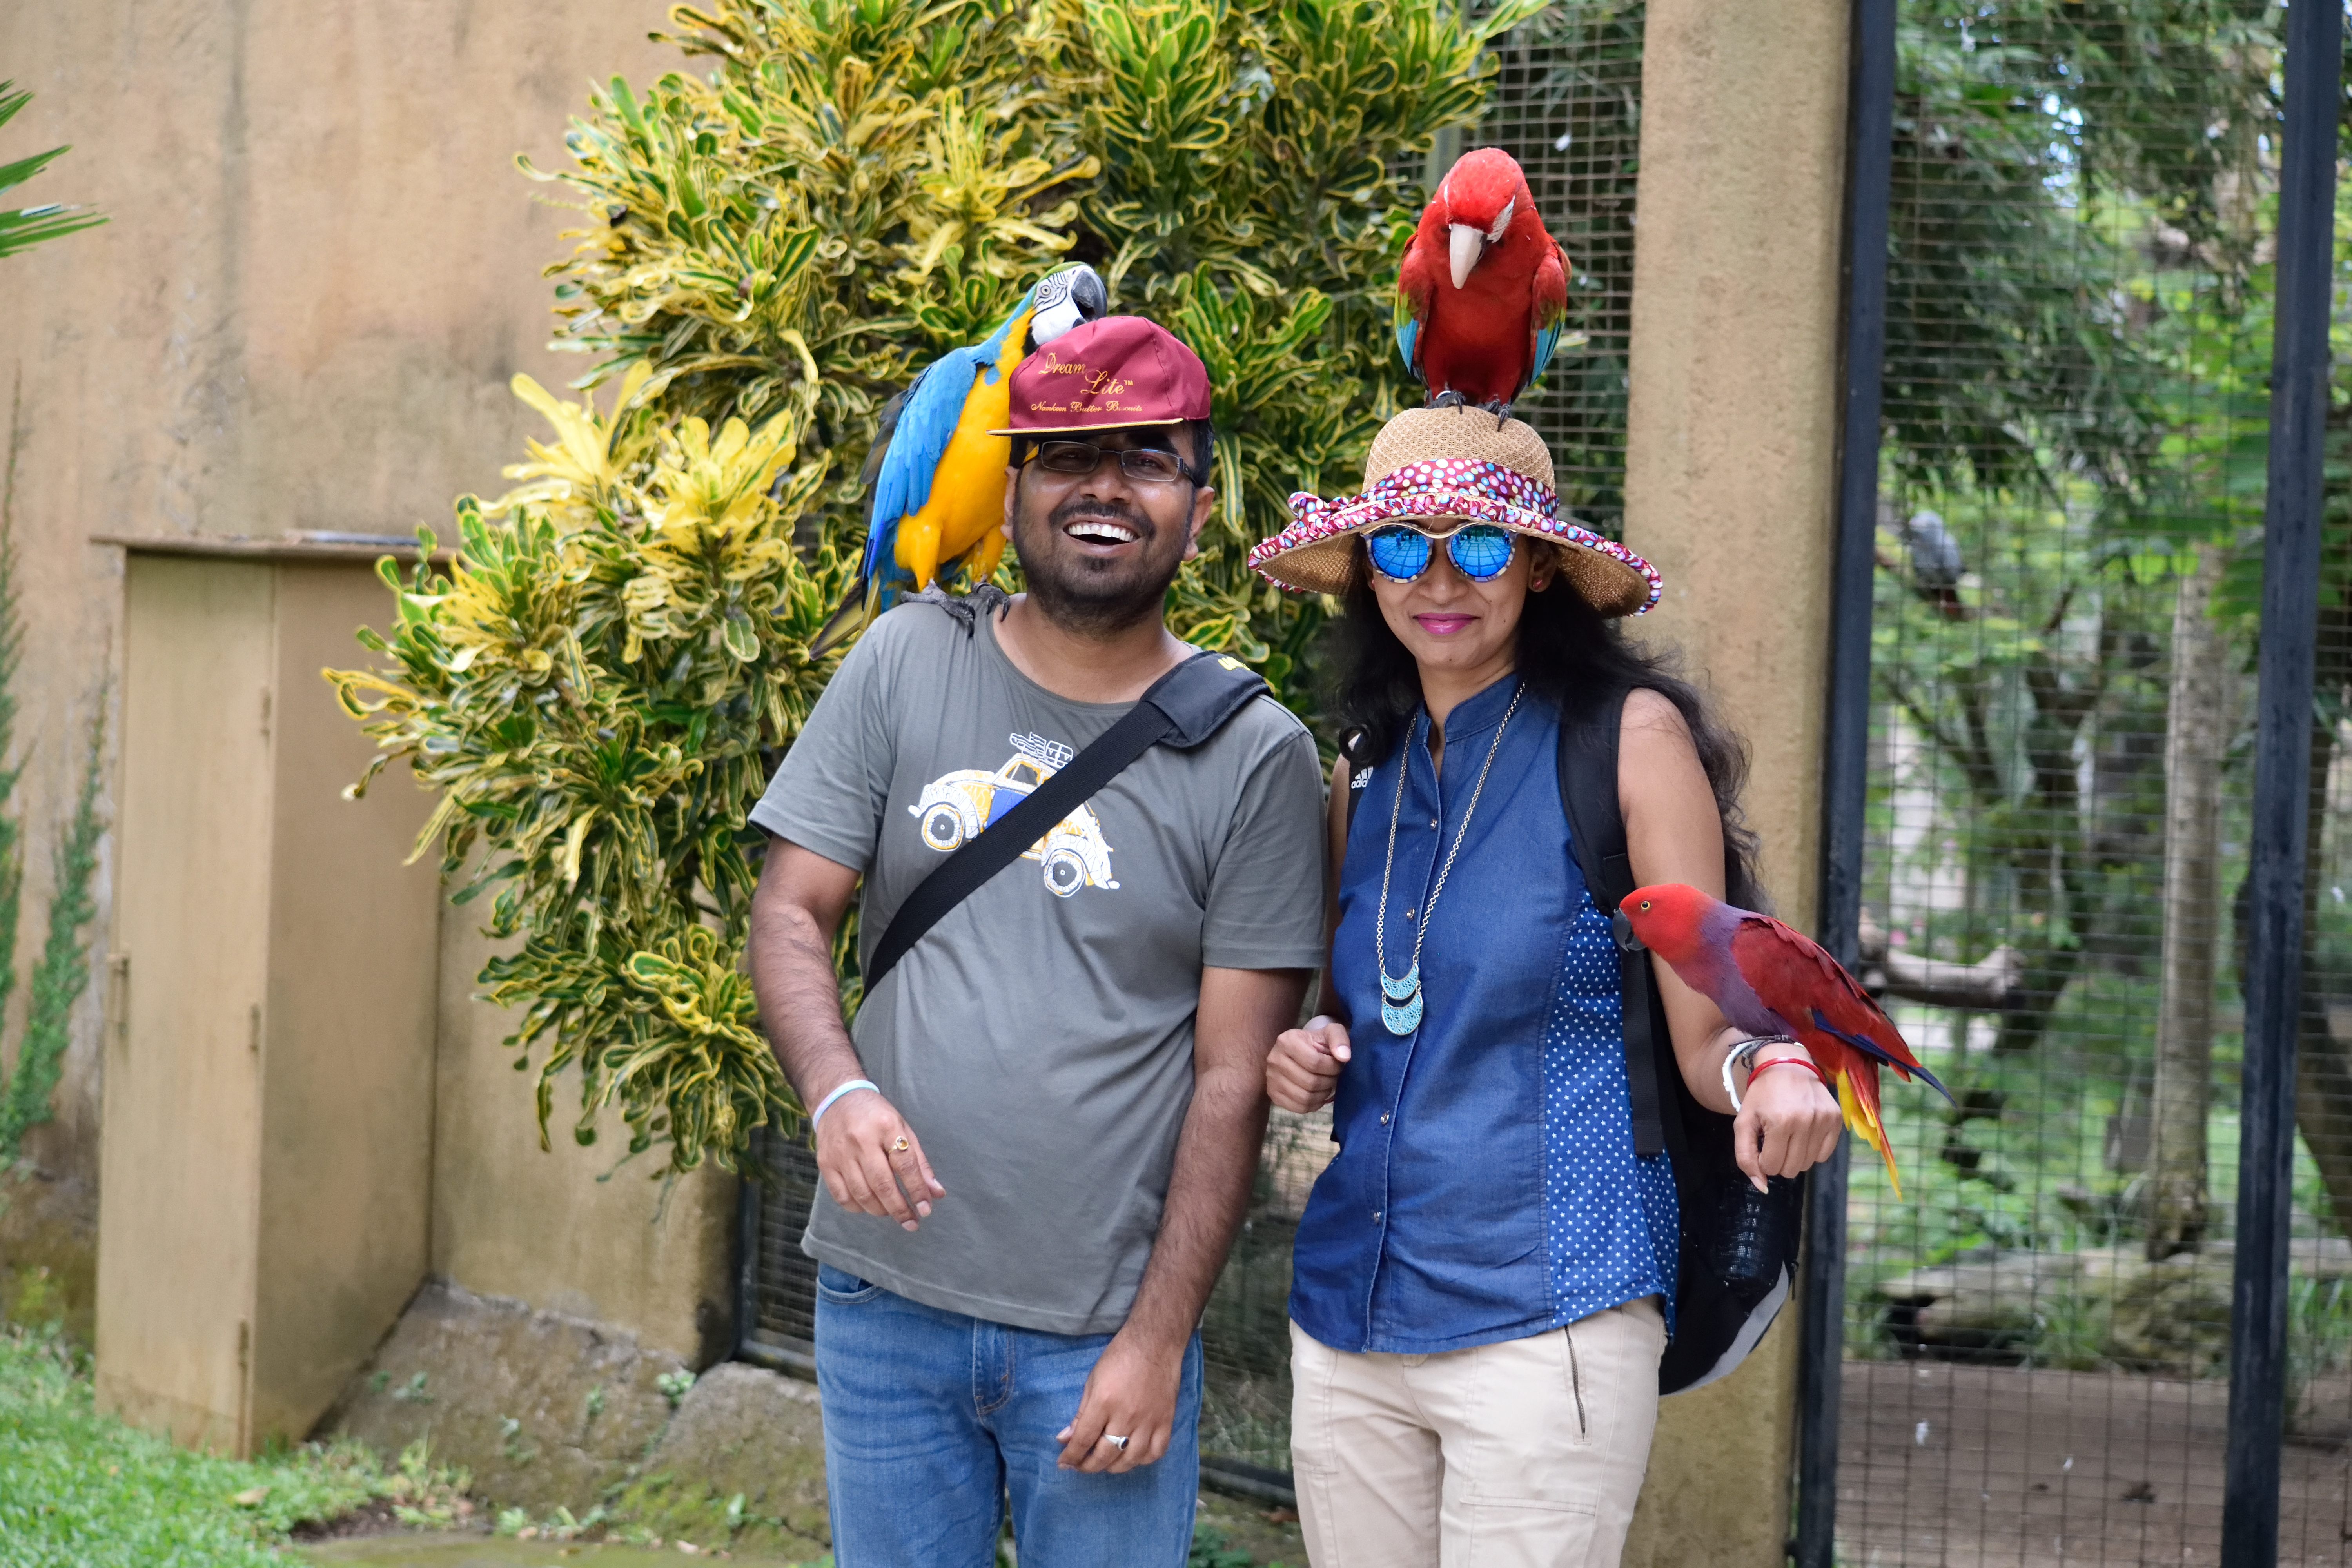 Macaws biting off the button from our cap in Bali Bird Park